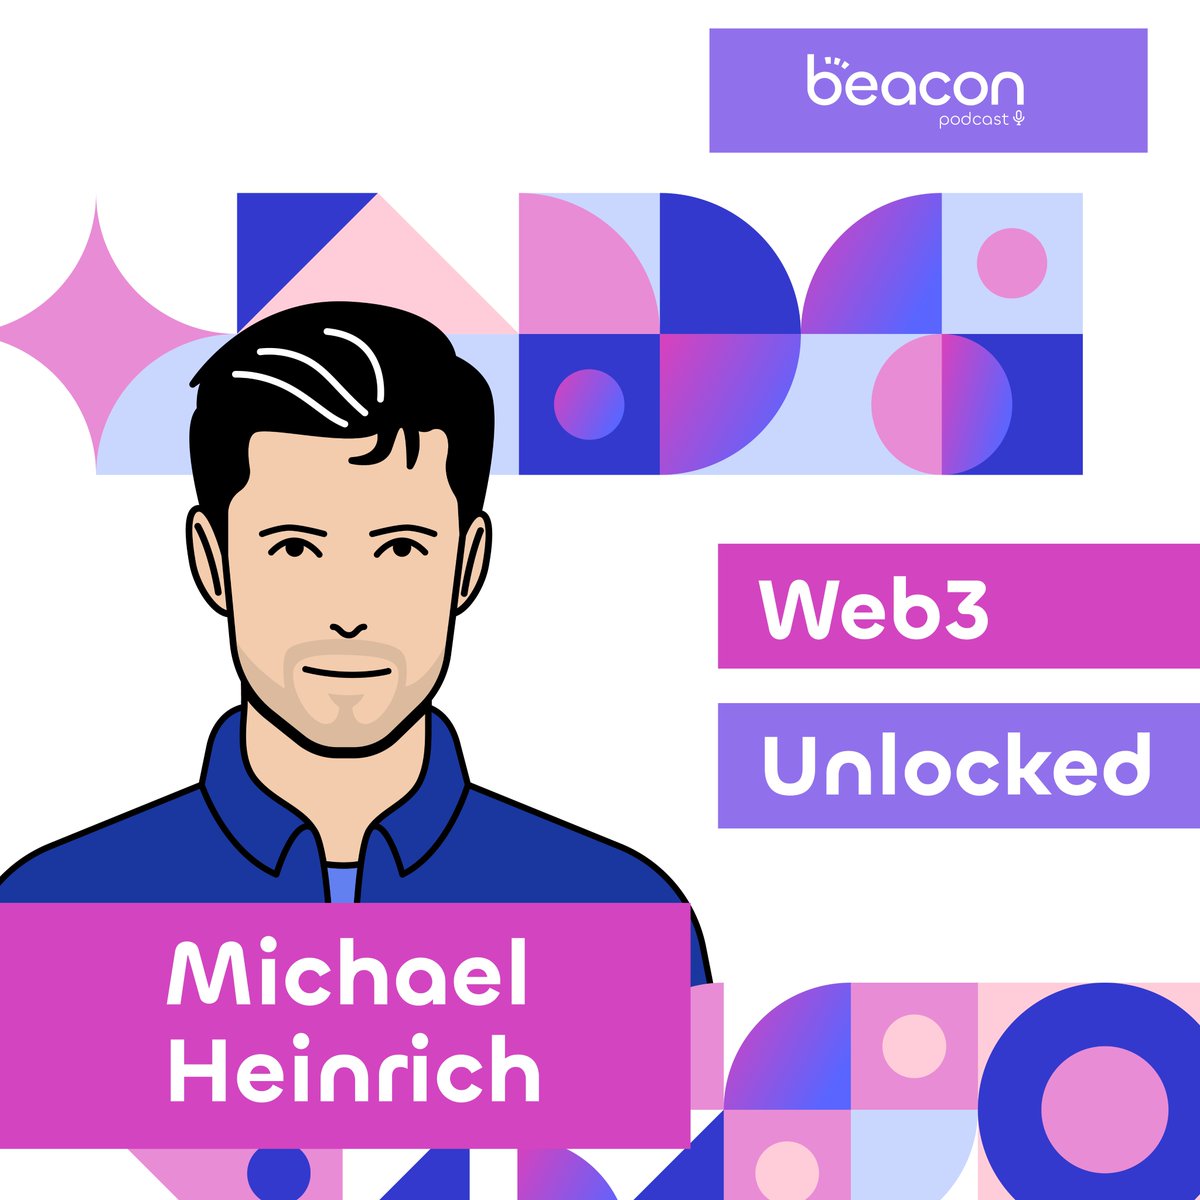 We are extremely excited to welcome @mheinrich, Co-Founder of 0G Labs, as this week's guest on the #Web3Unlocked podcast! We discussed the future of decentralized AI to how meditation can improve the lives of founders 🧘 Watch the full episode here: bit.ly/3UM4wDN